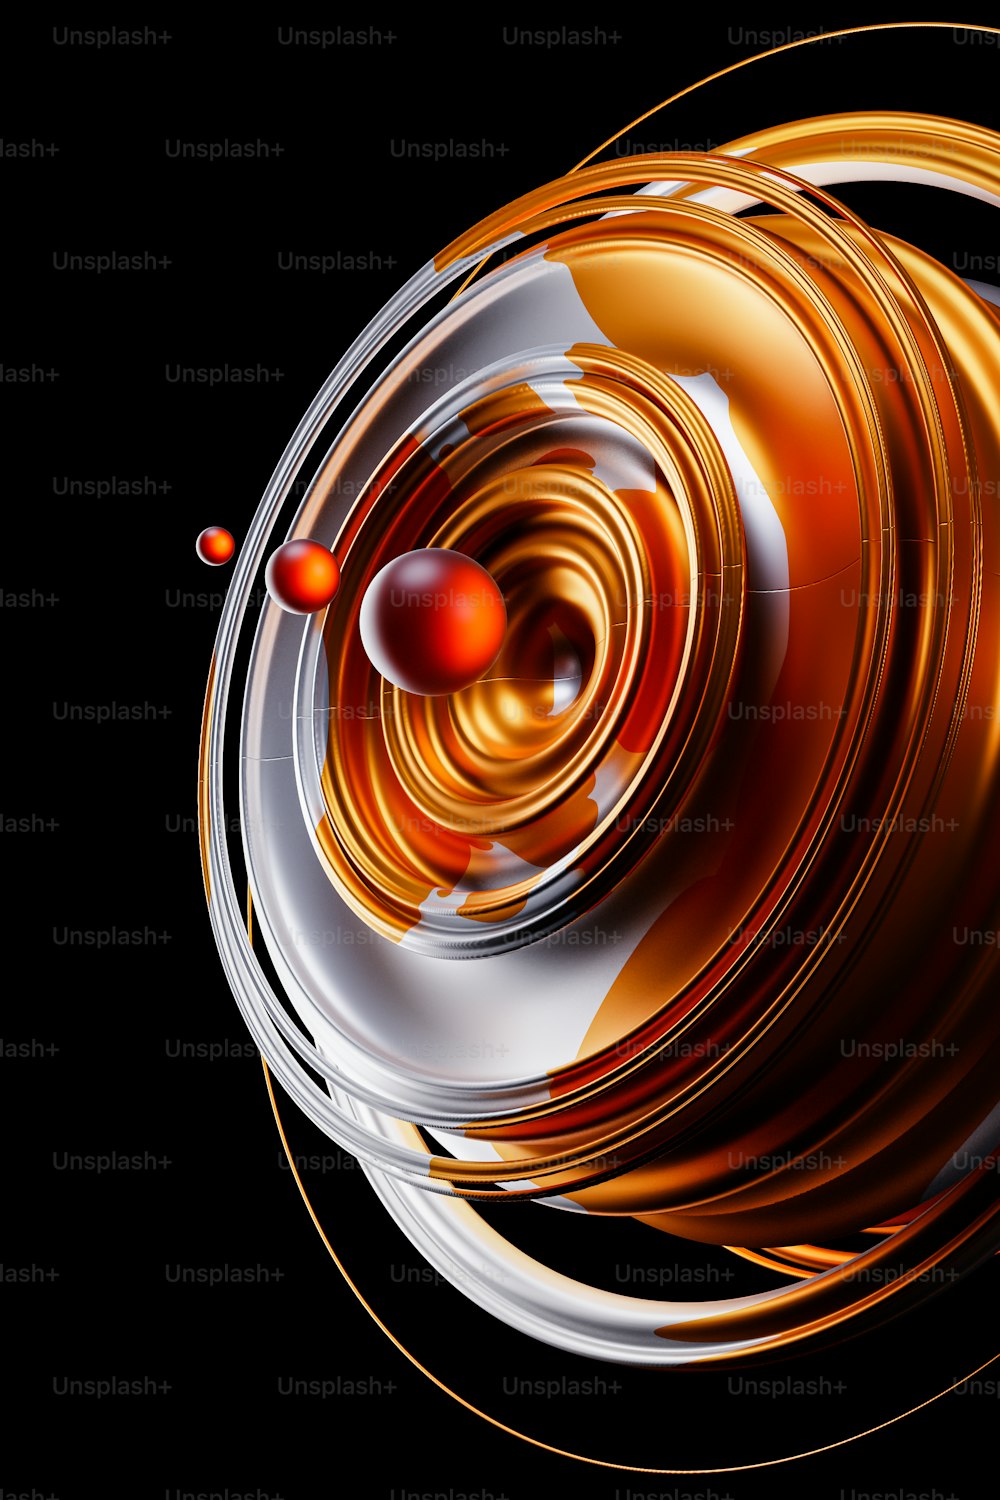 a computer generated image of an orange and white object